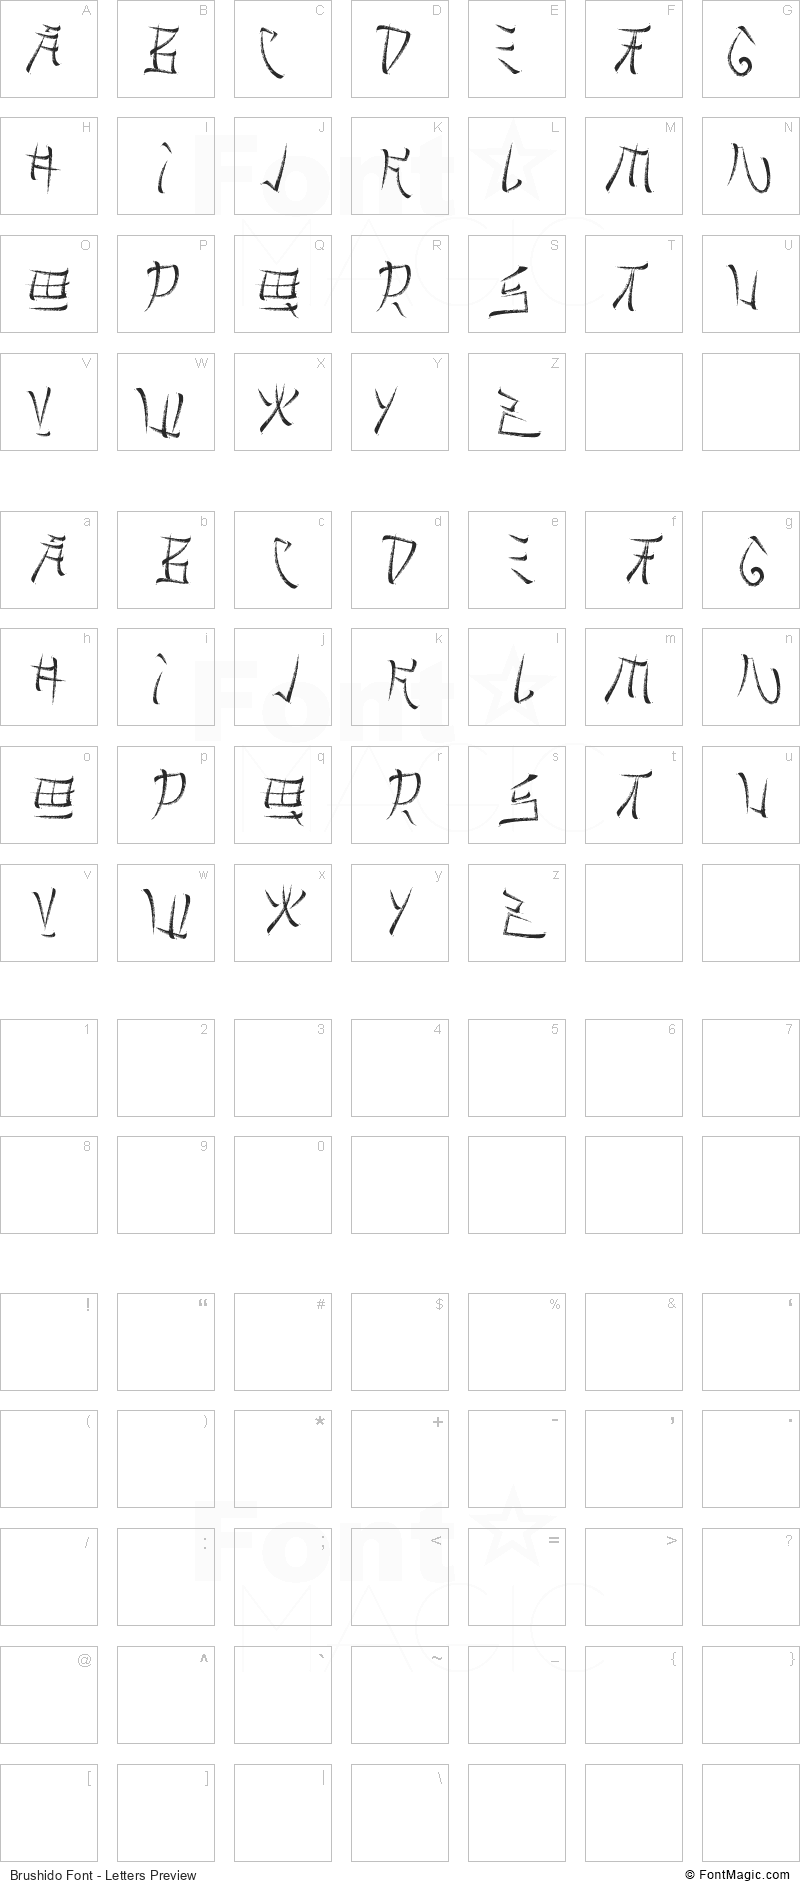 Brushido Font - All Latters Preview Chart